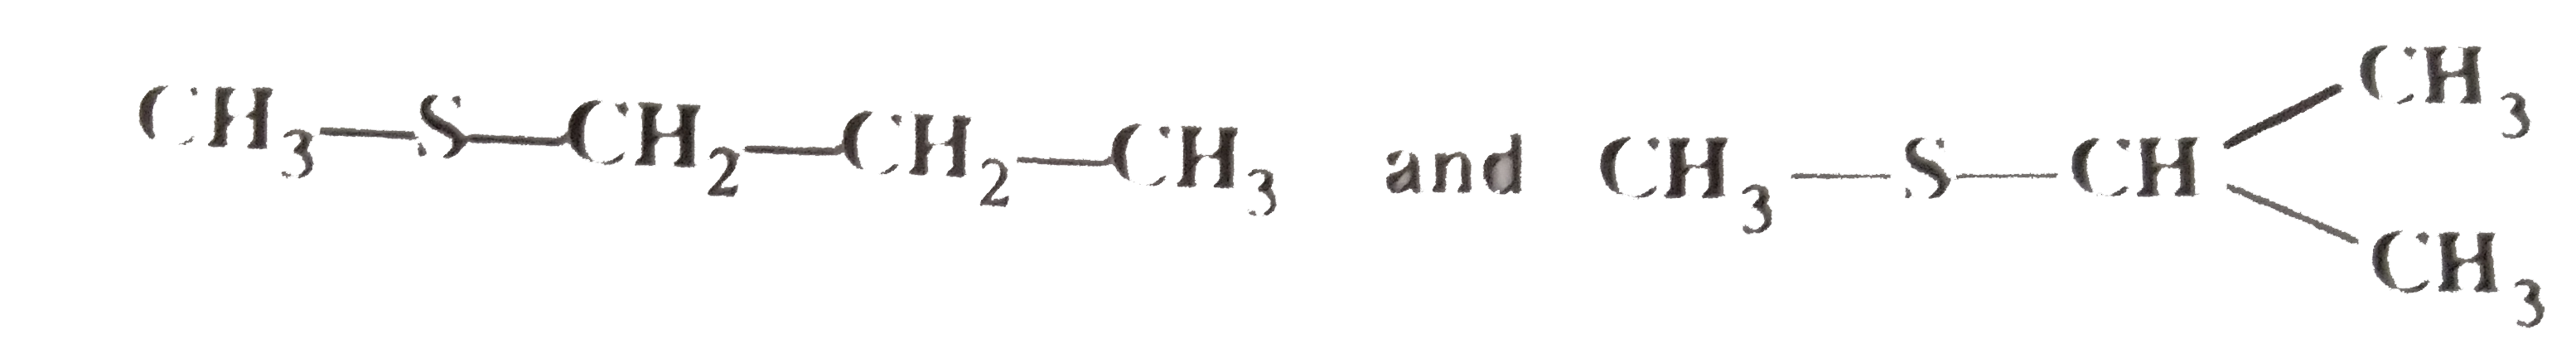 Compounds with same molecular formula but differing in their structures are said to be structural isomers. What type of structural isomerism is shown by   CH(3)-S-CH(2)-CH(2)-CH(3) and